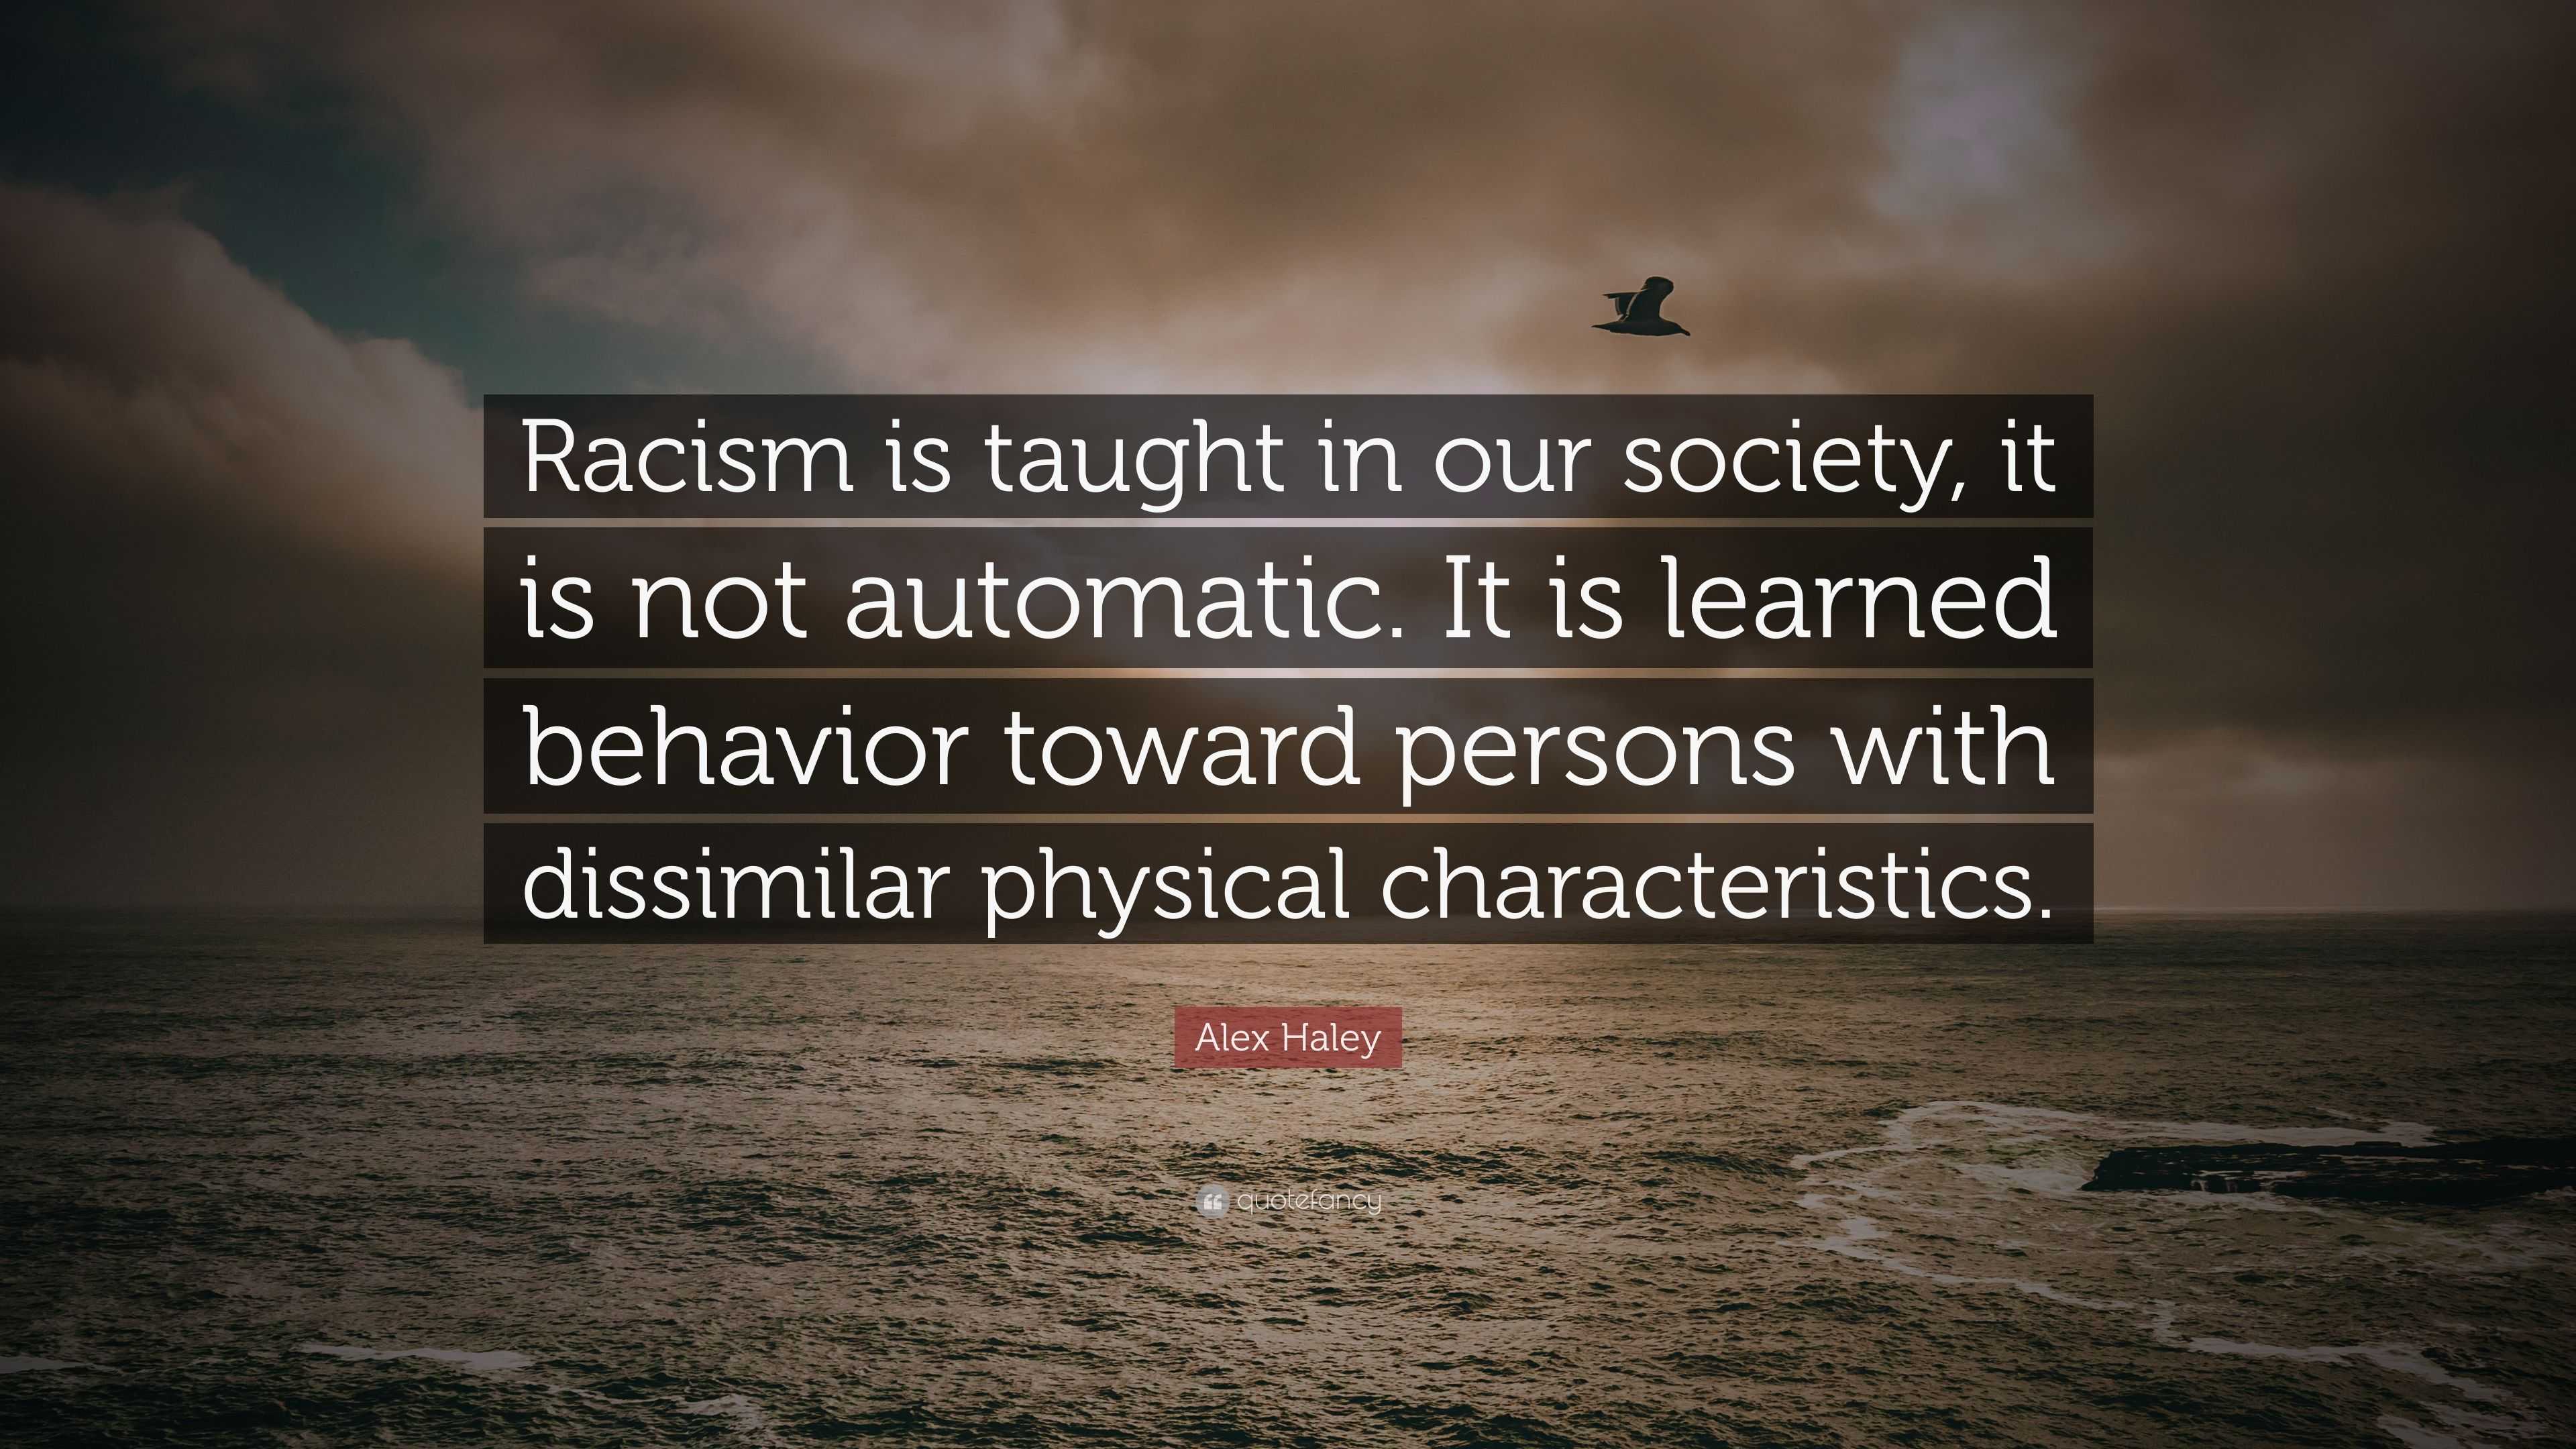 Alex Haley Quote: “Racism is taught in our society, it is not automatic ...